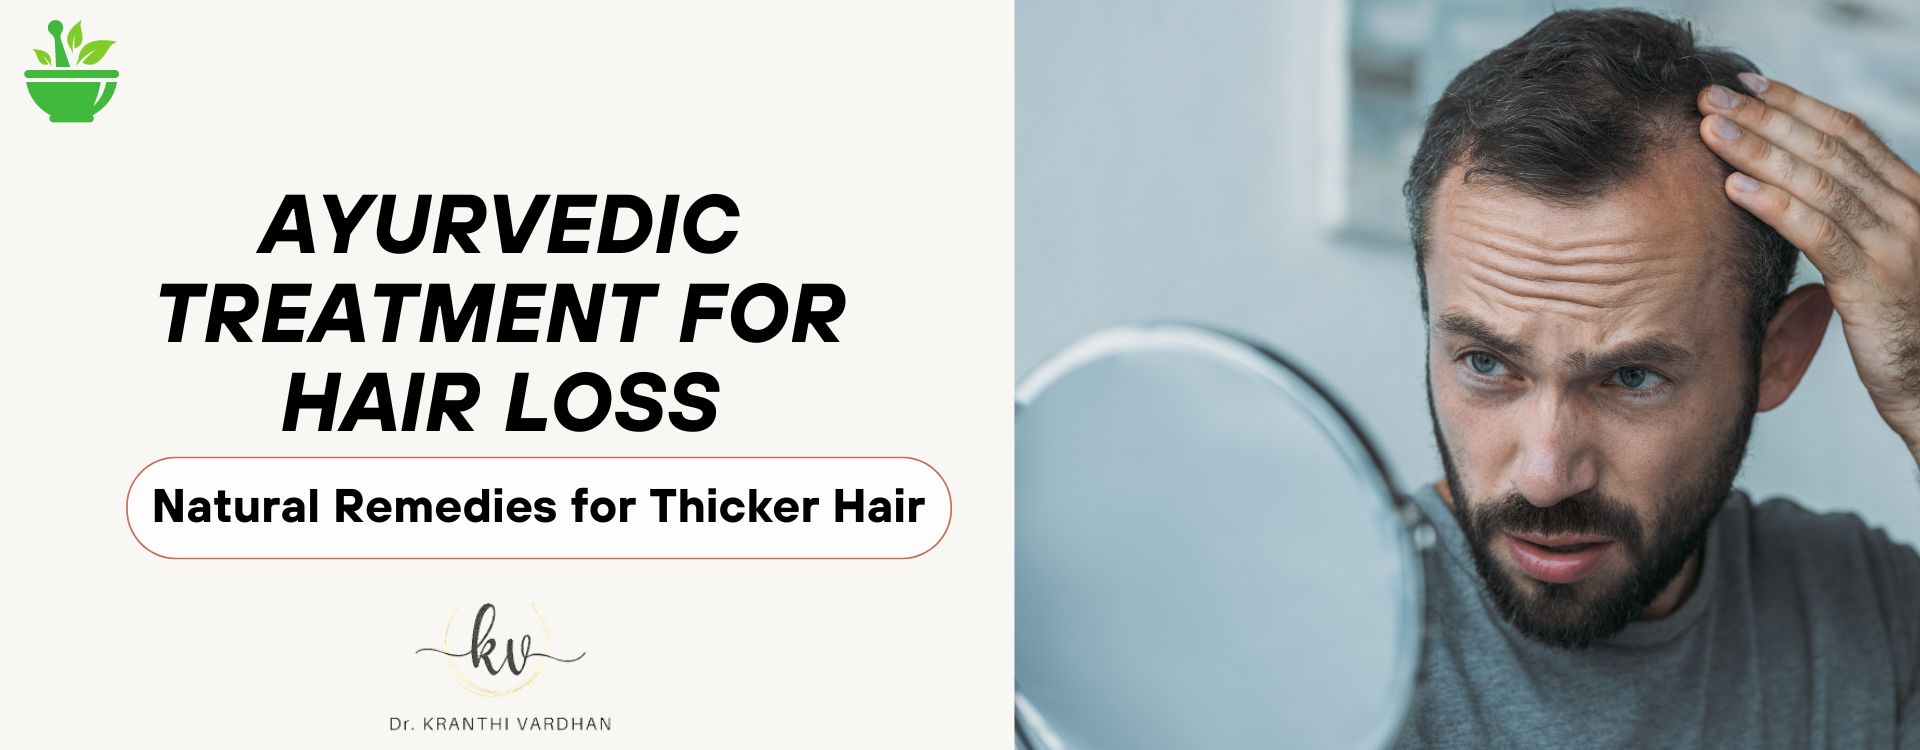 Ayurvedic Treatment for Hair Loss: Natural Remedies for Thicker Hair